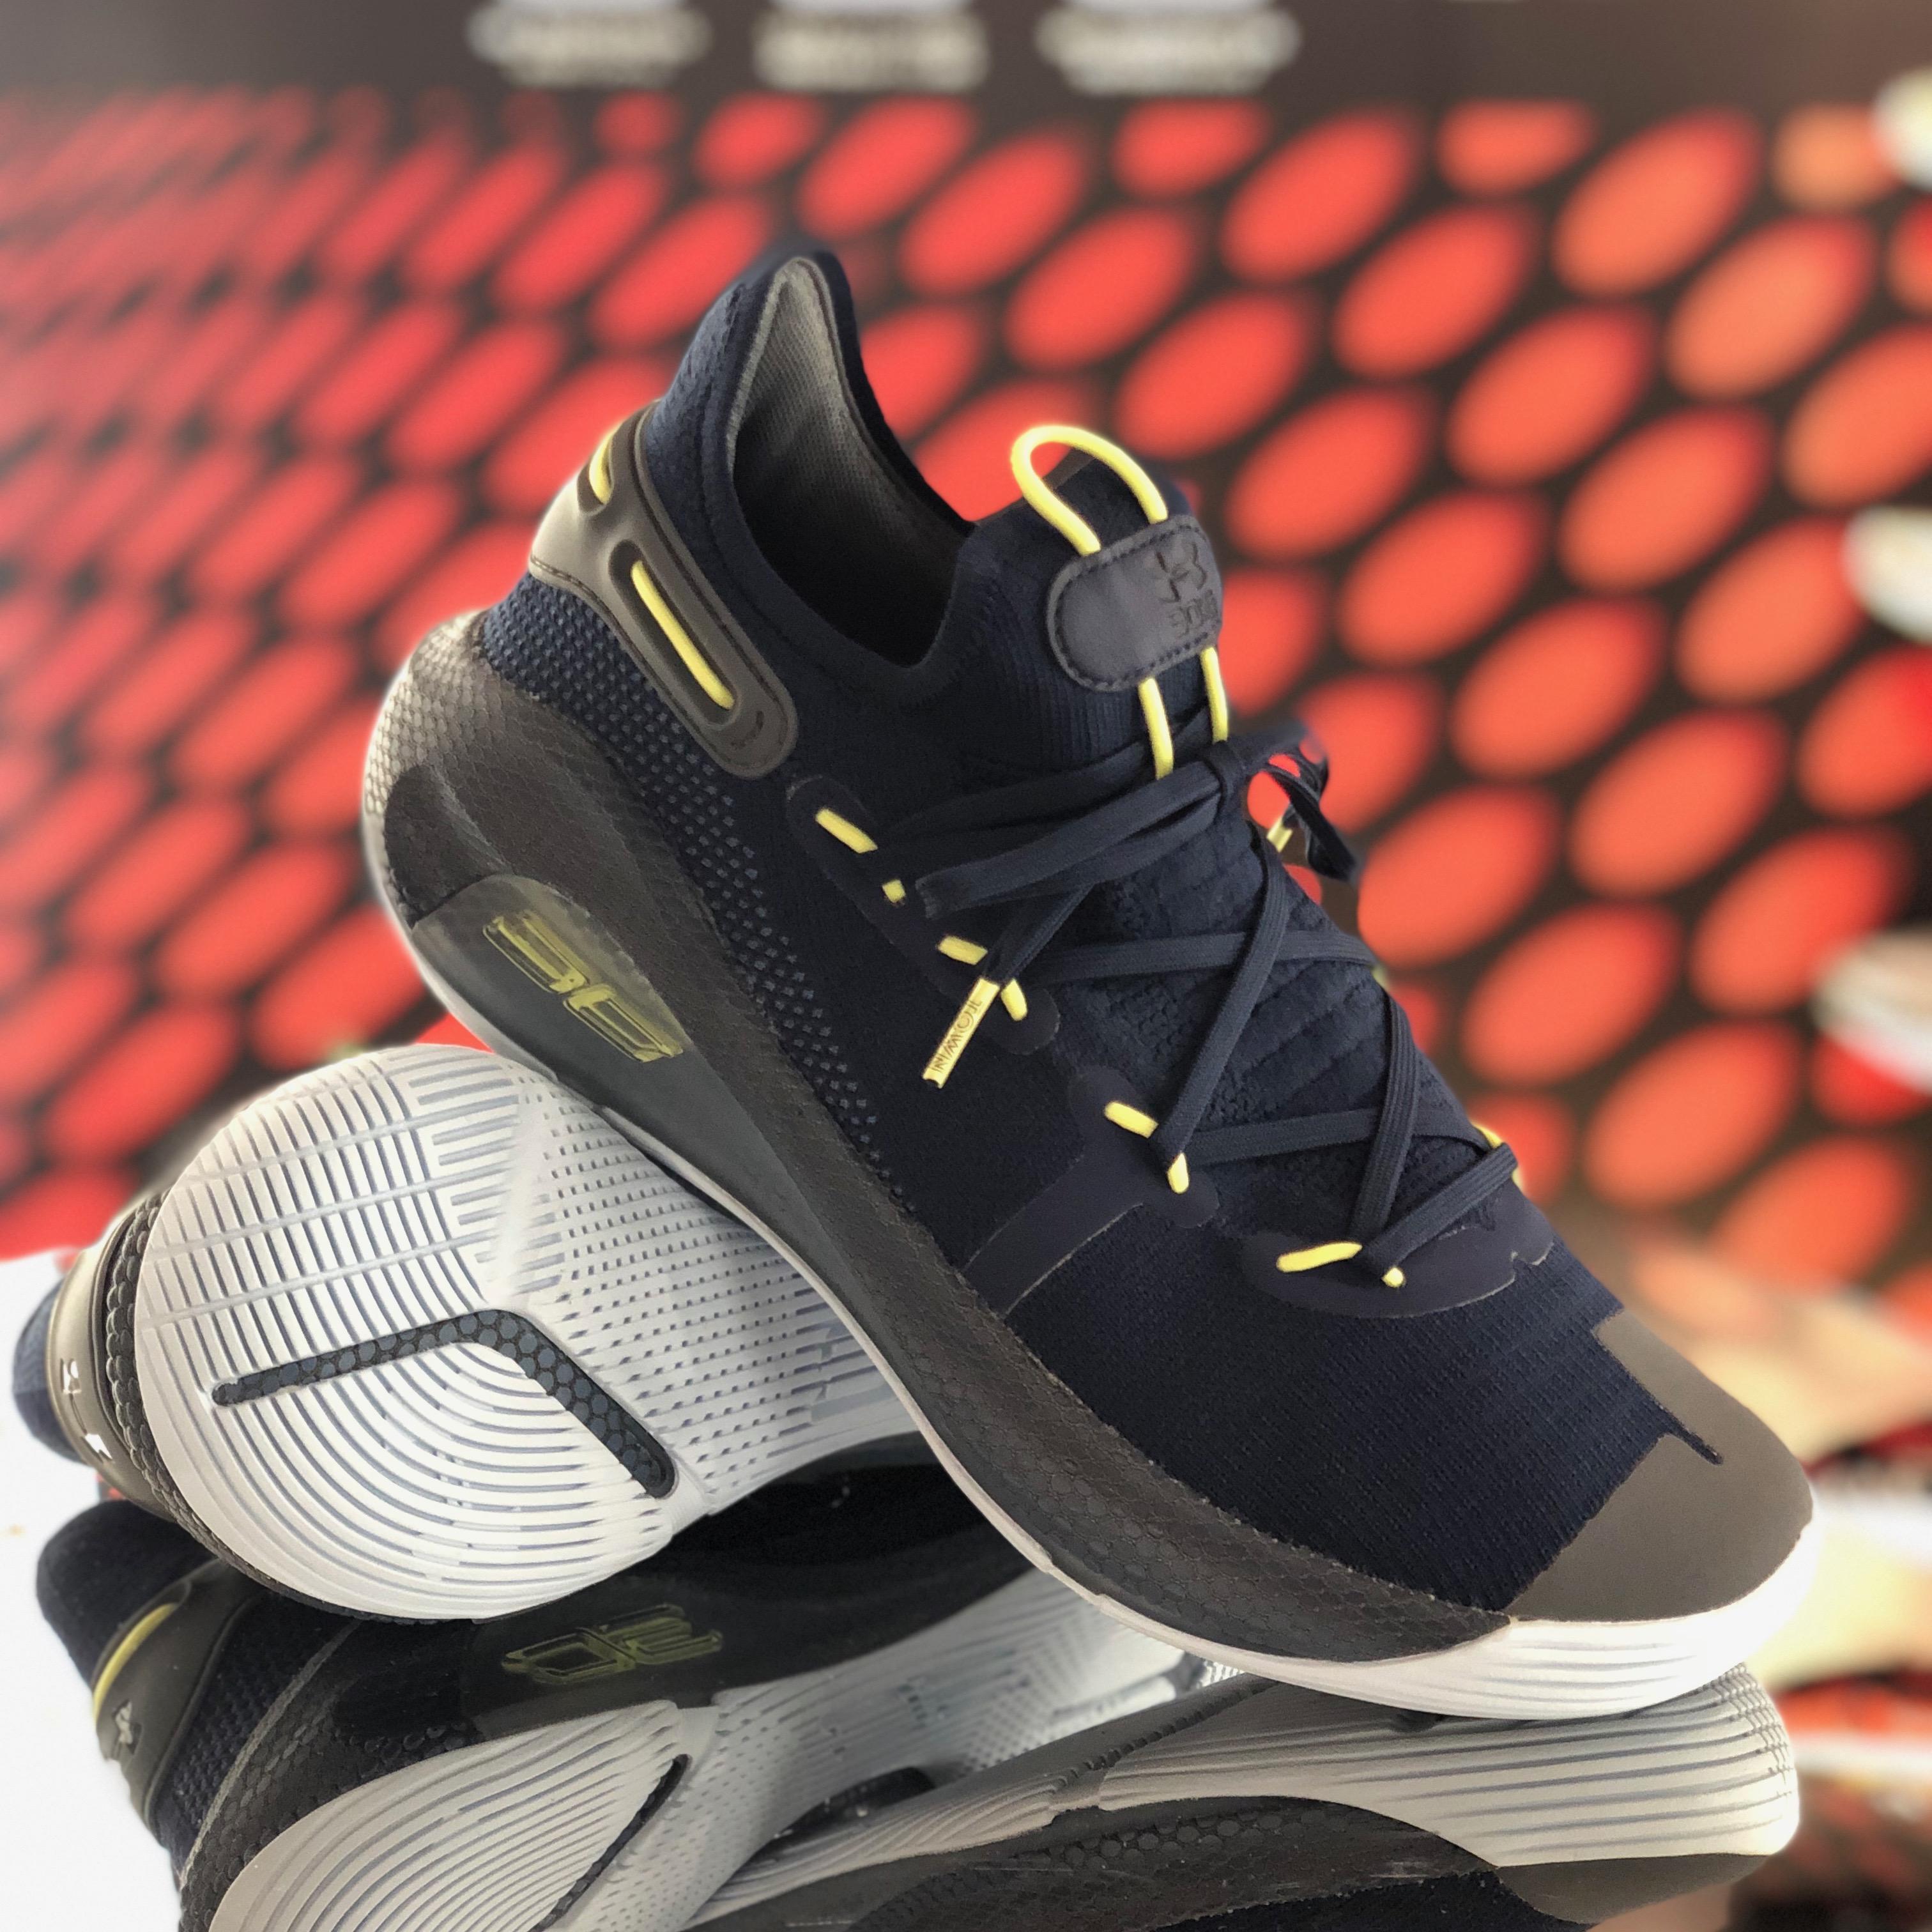 Curry6 NEWカラー発売 | UNDER ARMOUR CLUBHOUSE 渋谷 | SHOP BLOG ...